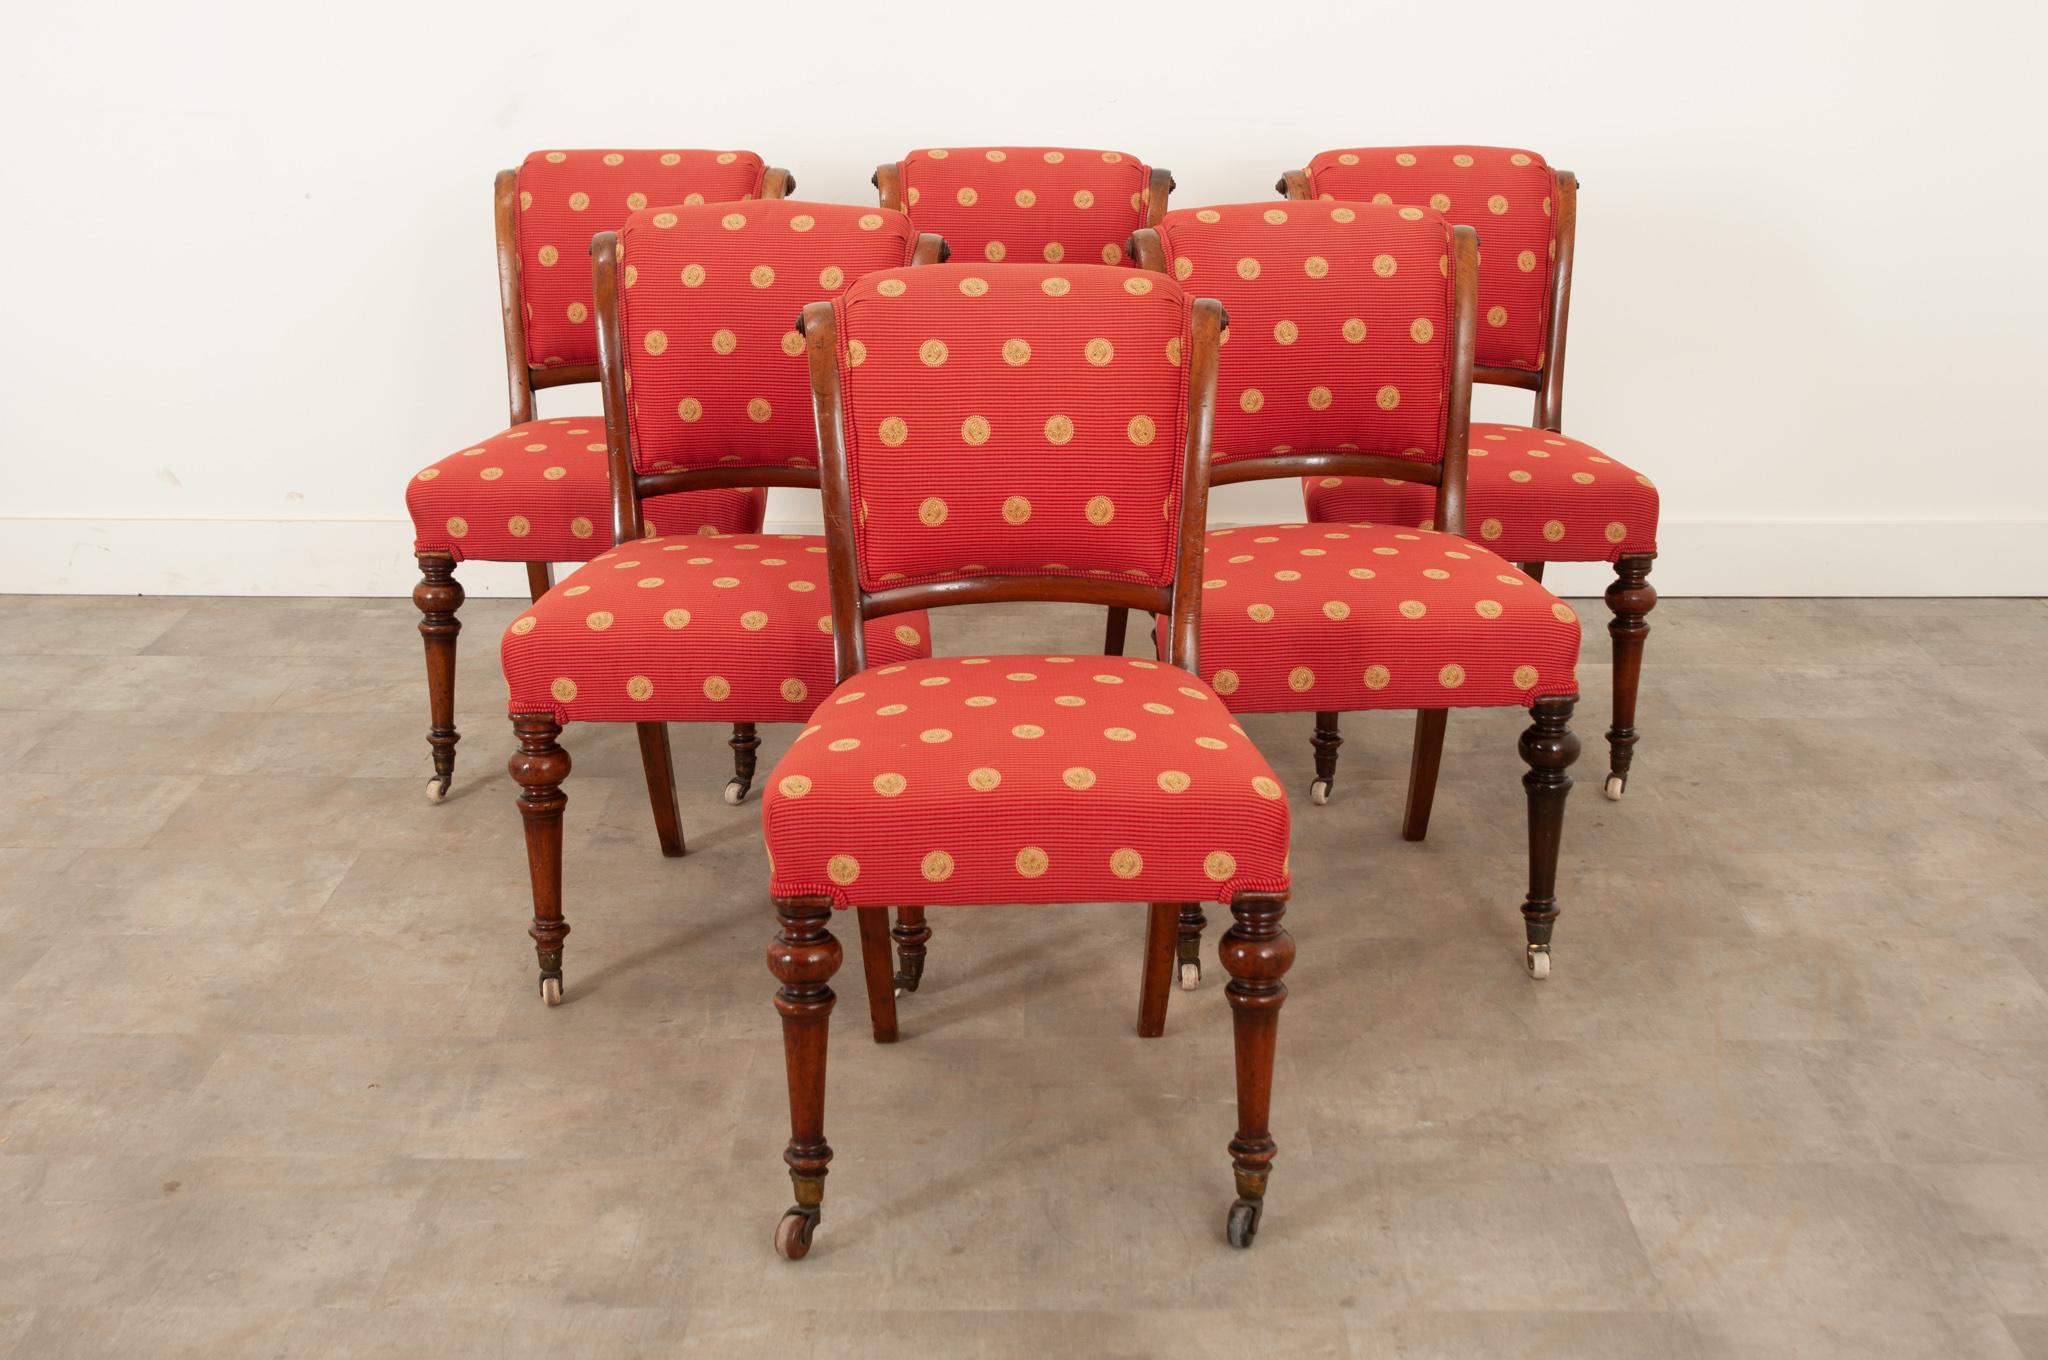 This fantastic set of six mahogany Dutch dining chairs was crafted circa 1850. Upholstered in an eye-catching red striped fabric with gold butterflies and double welt edges at the legs. The back support has a wonderful curve to it and continues to